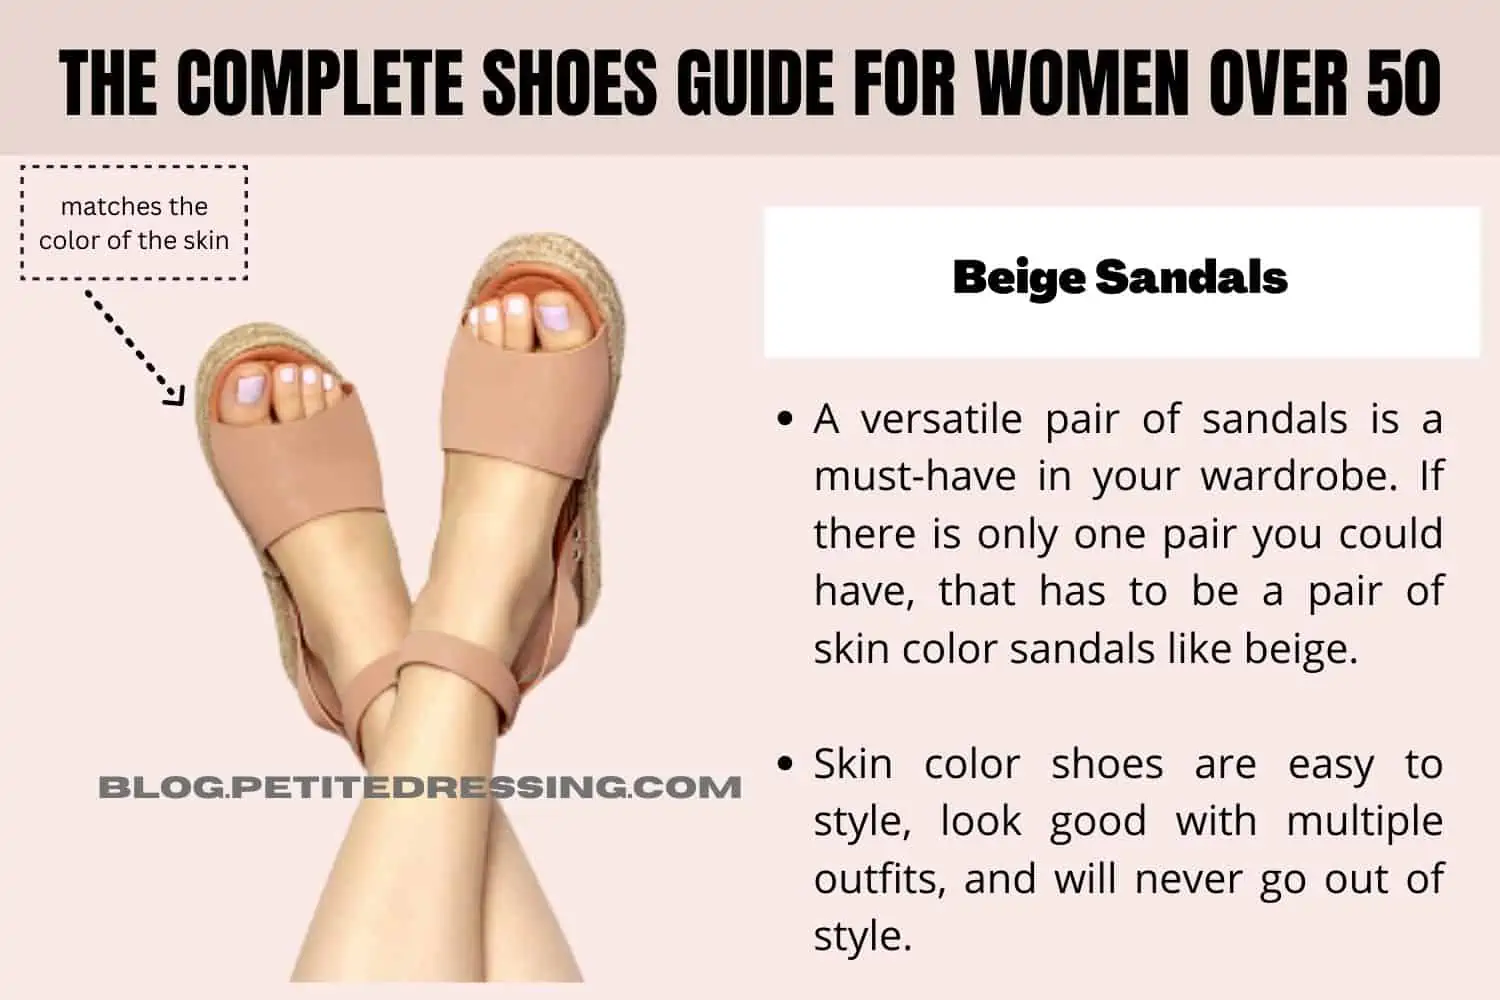 Style Guide and Wardrobe Tips for Women Over 50